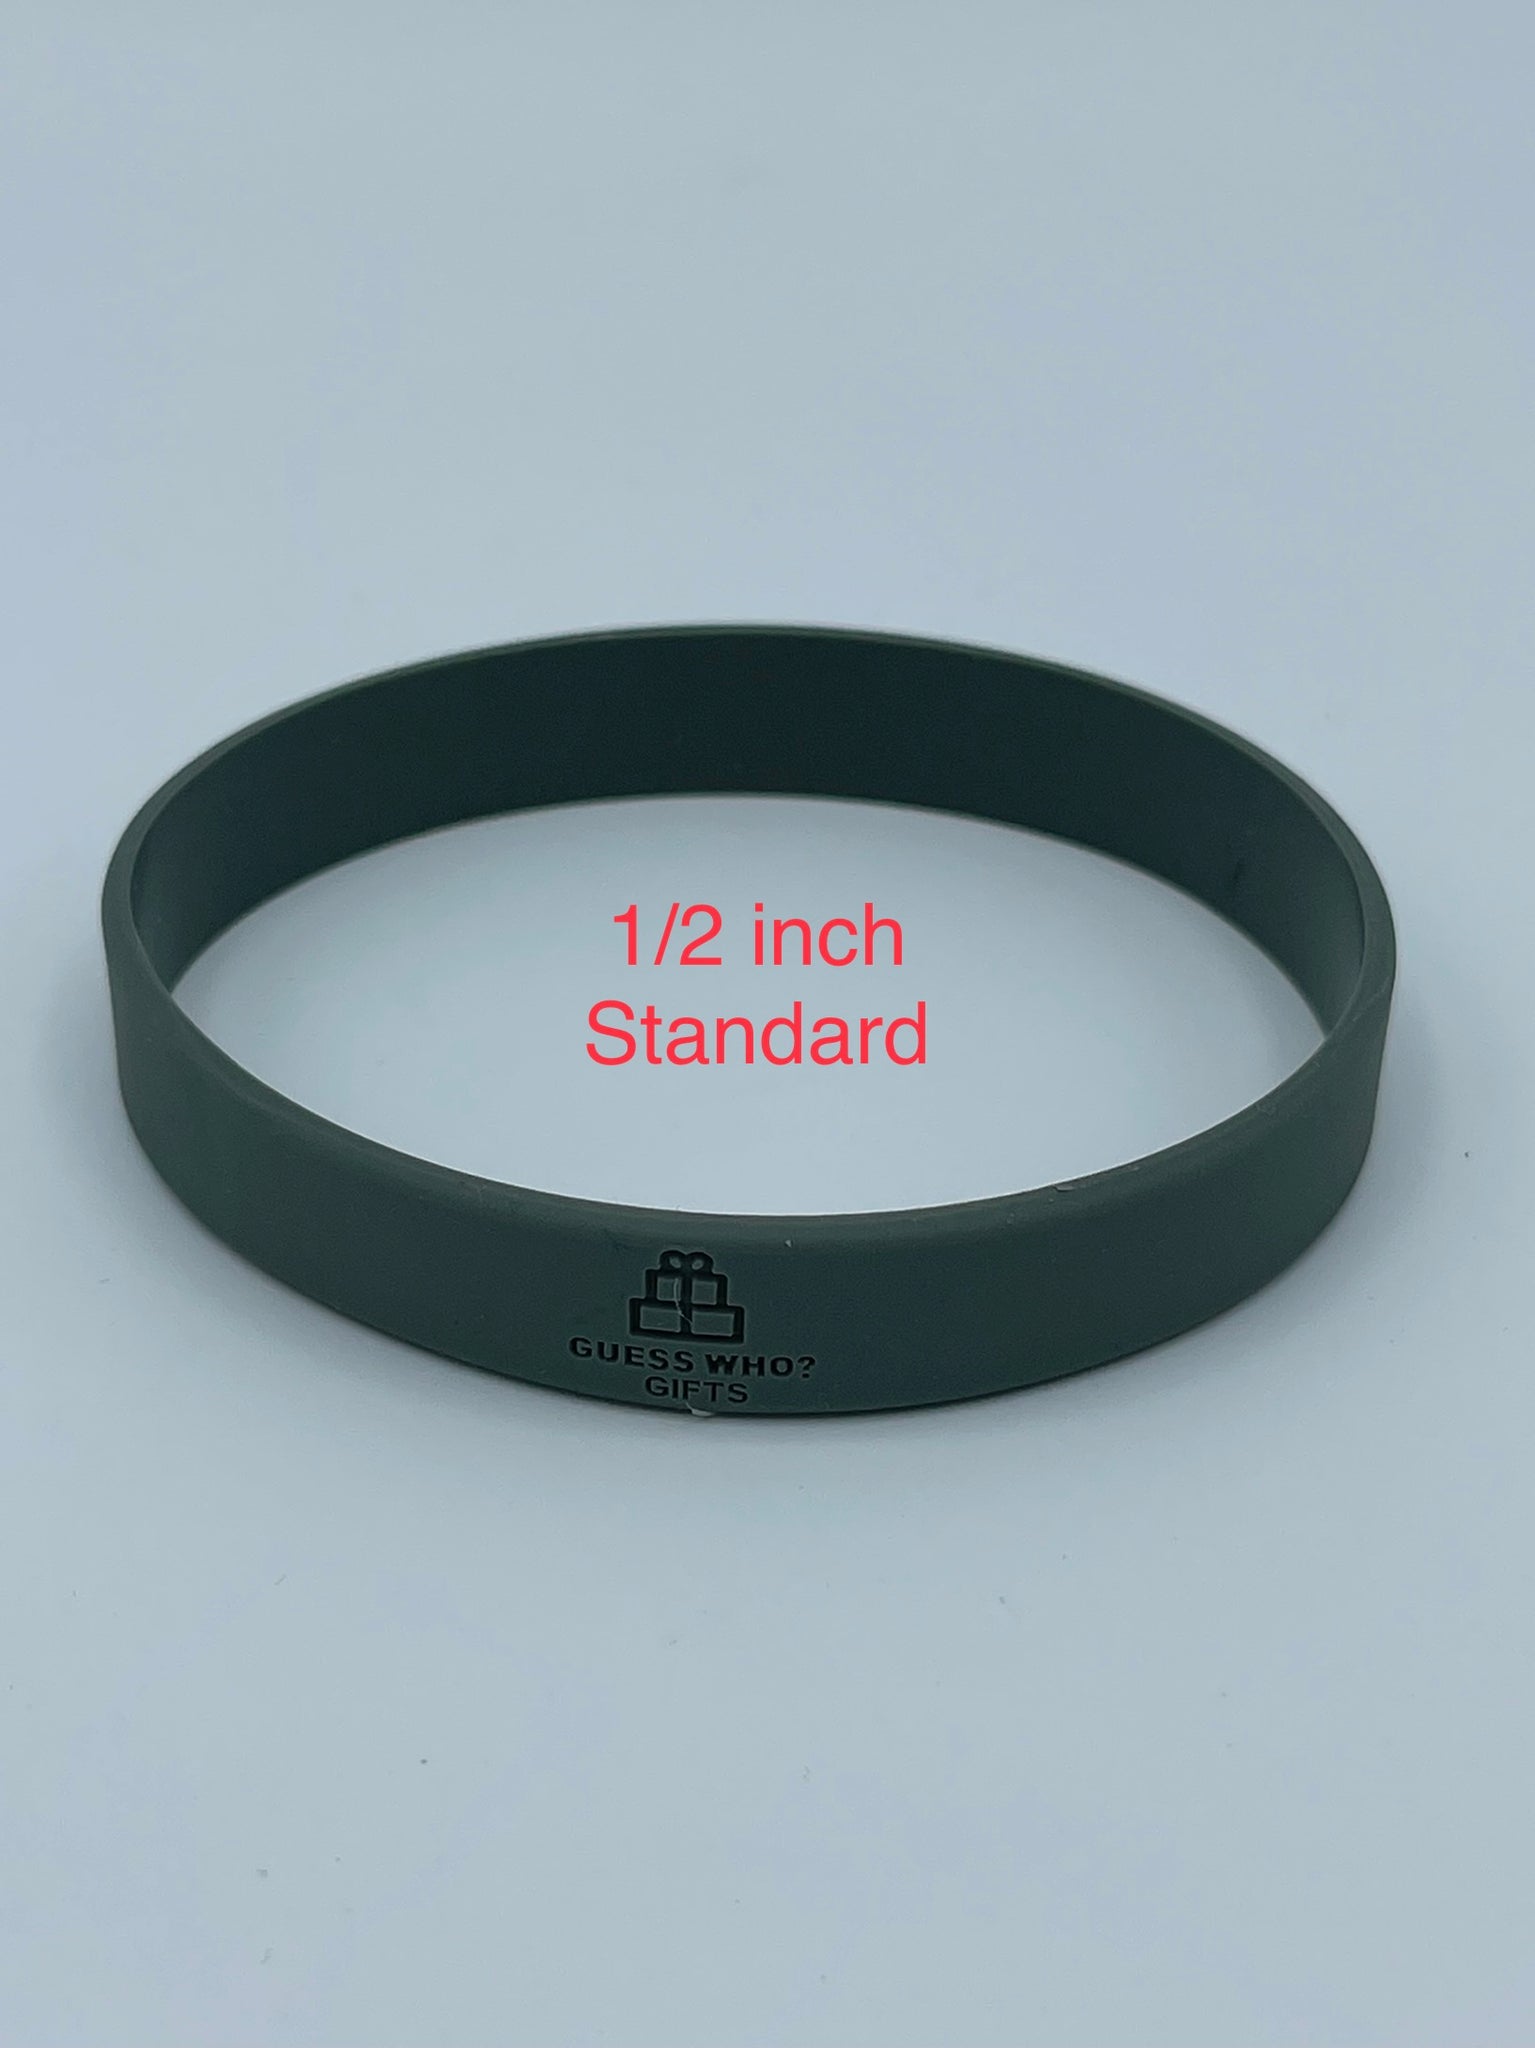 10pcs 65mm Silicone Bands For Sublimation Tumbler Heat Resistant  Sublimation Paper Holder Ring Band